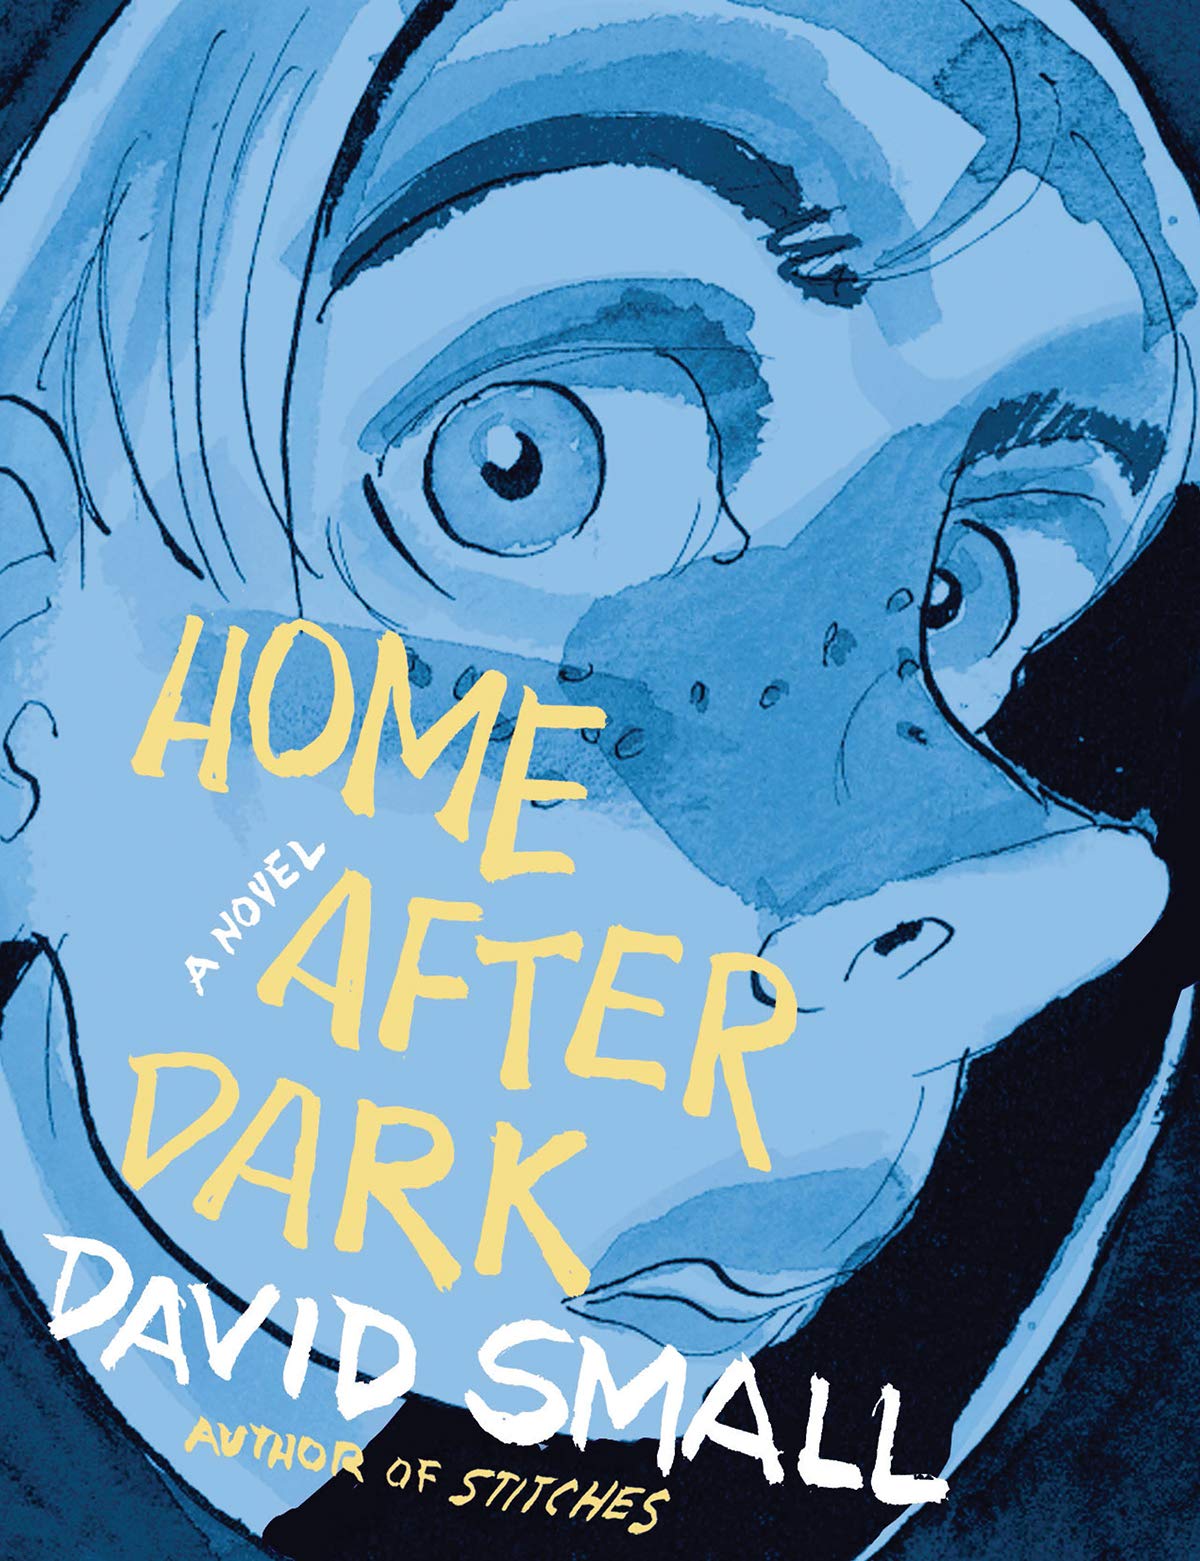 A book cover for Home After Dark